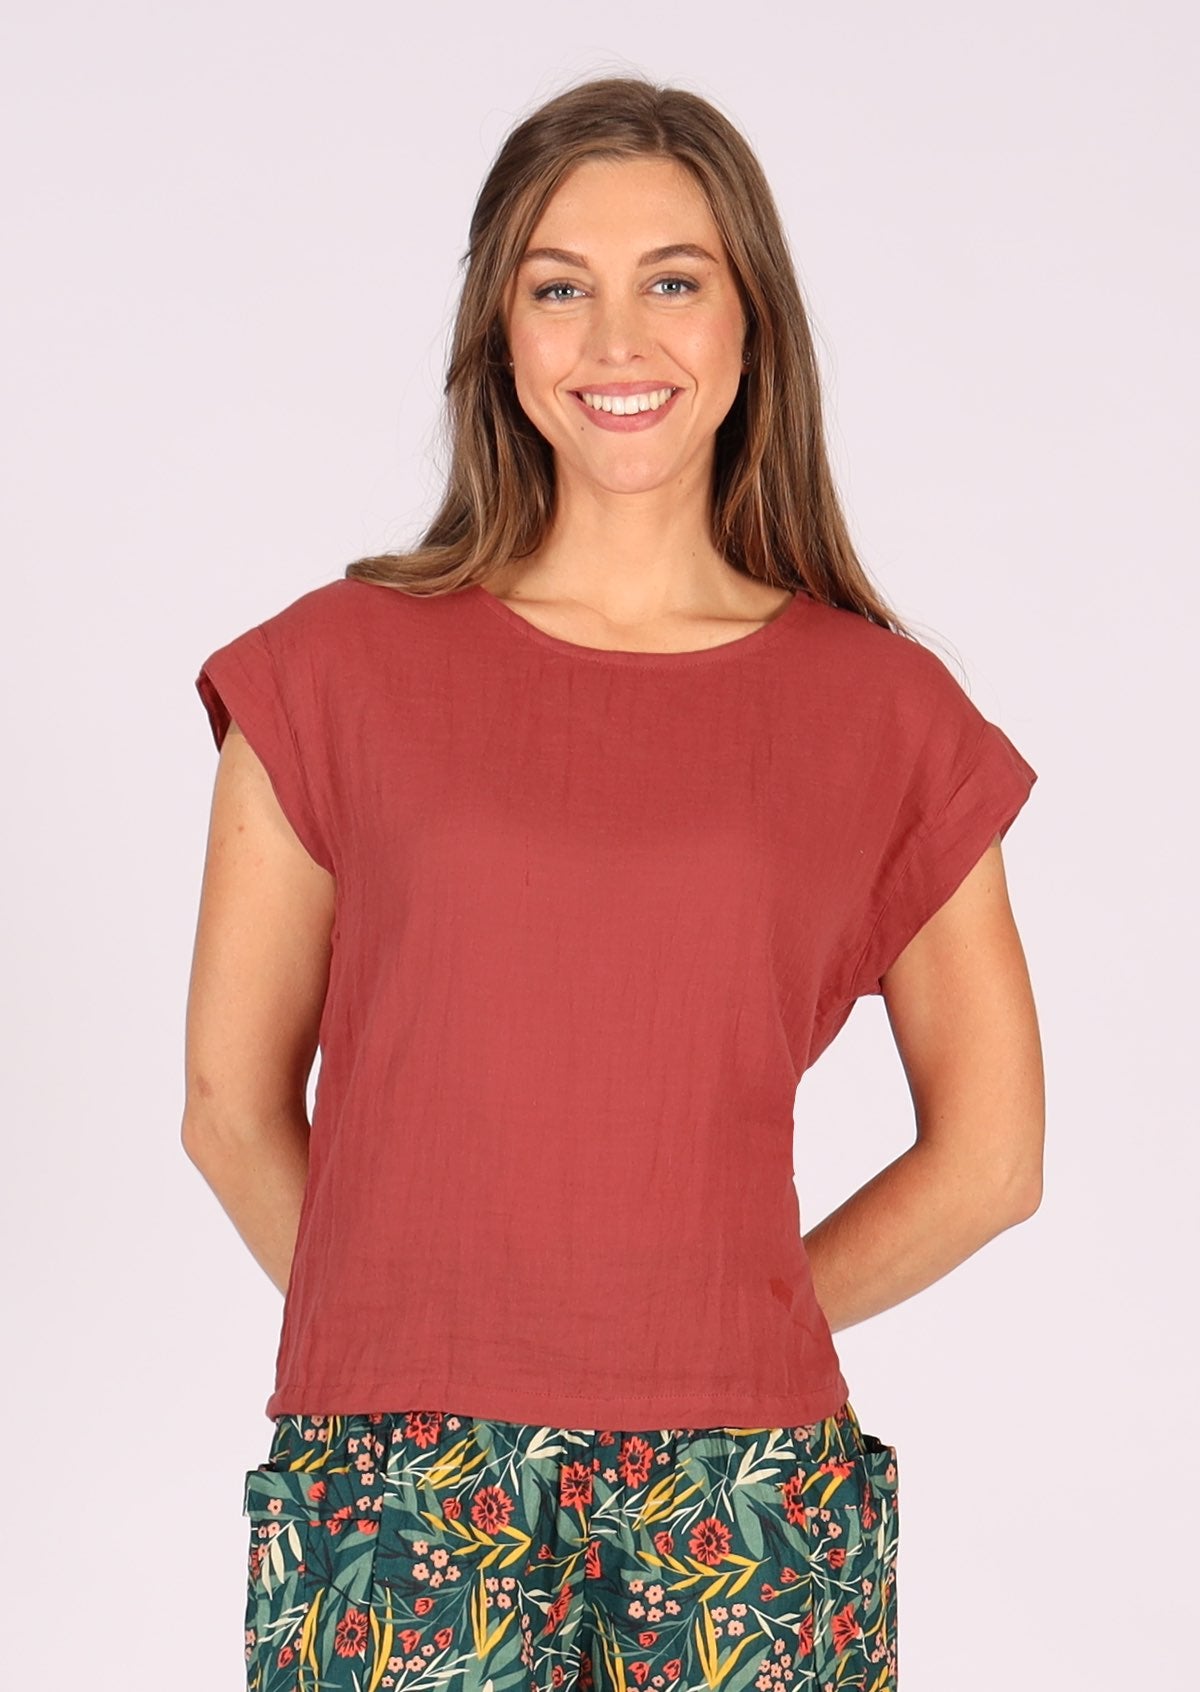 Two layers of 100% cotton gauze make this top